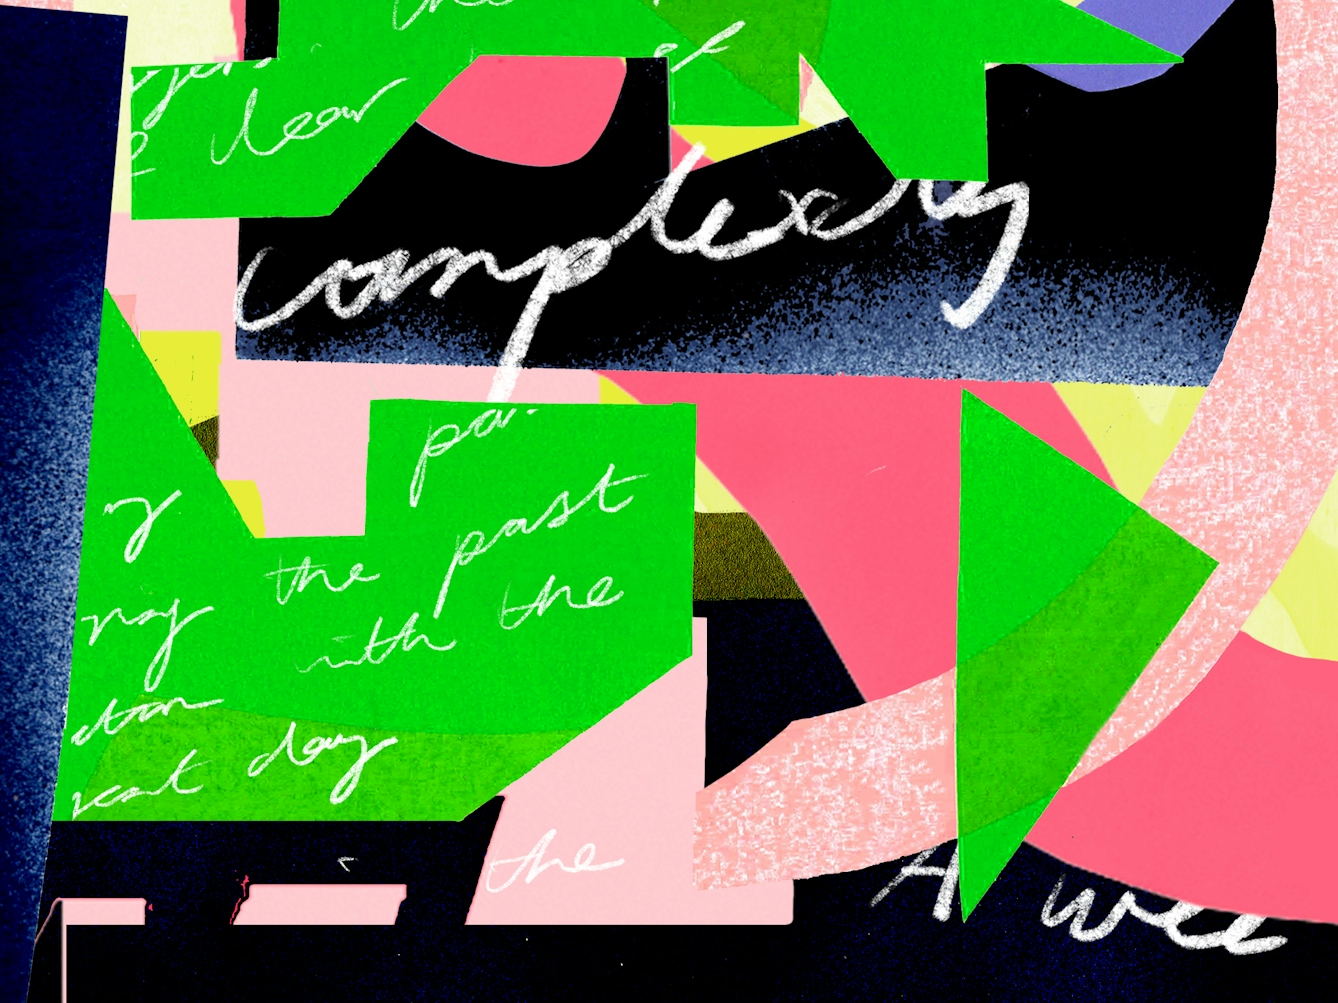 Detail from a larger colourful digital artwork created in a collage aesthetic. The artwork is made up of fragments of letters, geometric shapes and snippets of handwritten, joined up text. The hues are pinks, greens, purples and yellows, set against a dark black and blue background. The letters are sometimes the right way up and sometimes at an angle. Other graphic elements overlap them, obscuring parts. The handwritten text is not easy to read, but some words push through, like 'complexity'. The overall feel is of graphic fragmentation with communication at its centre.